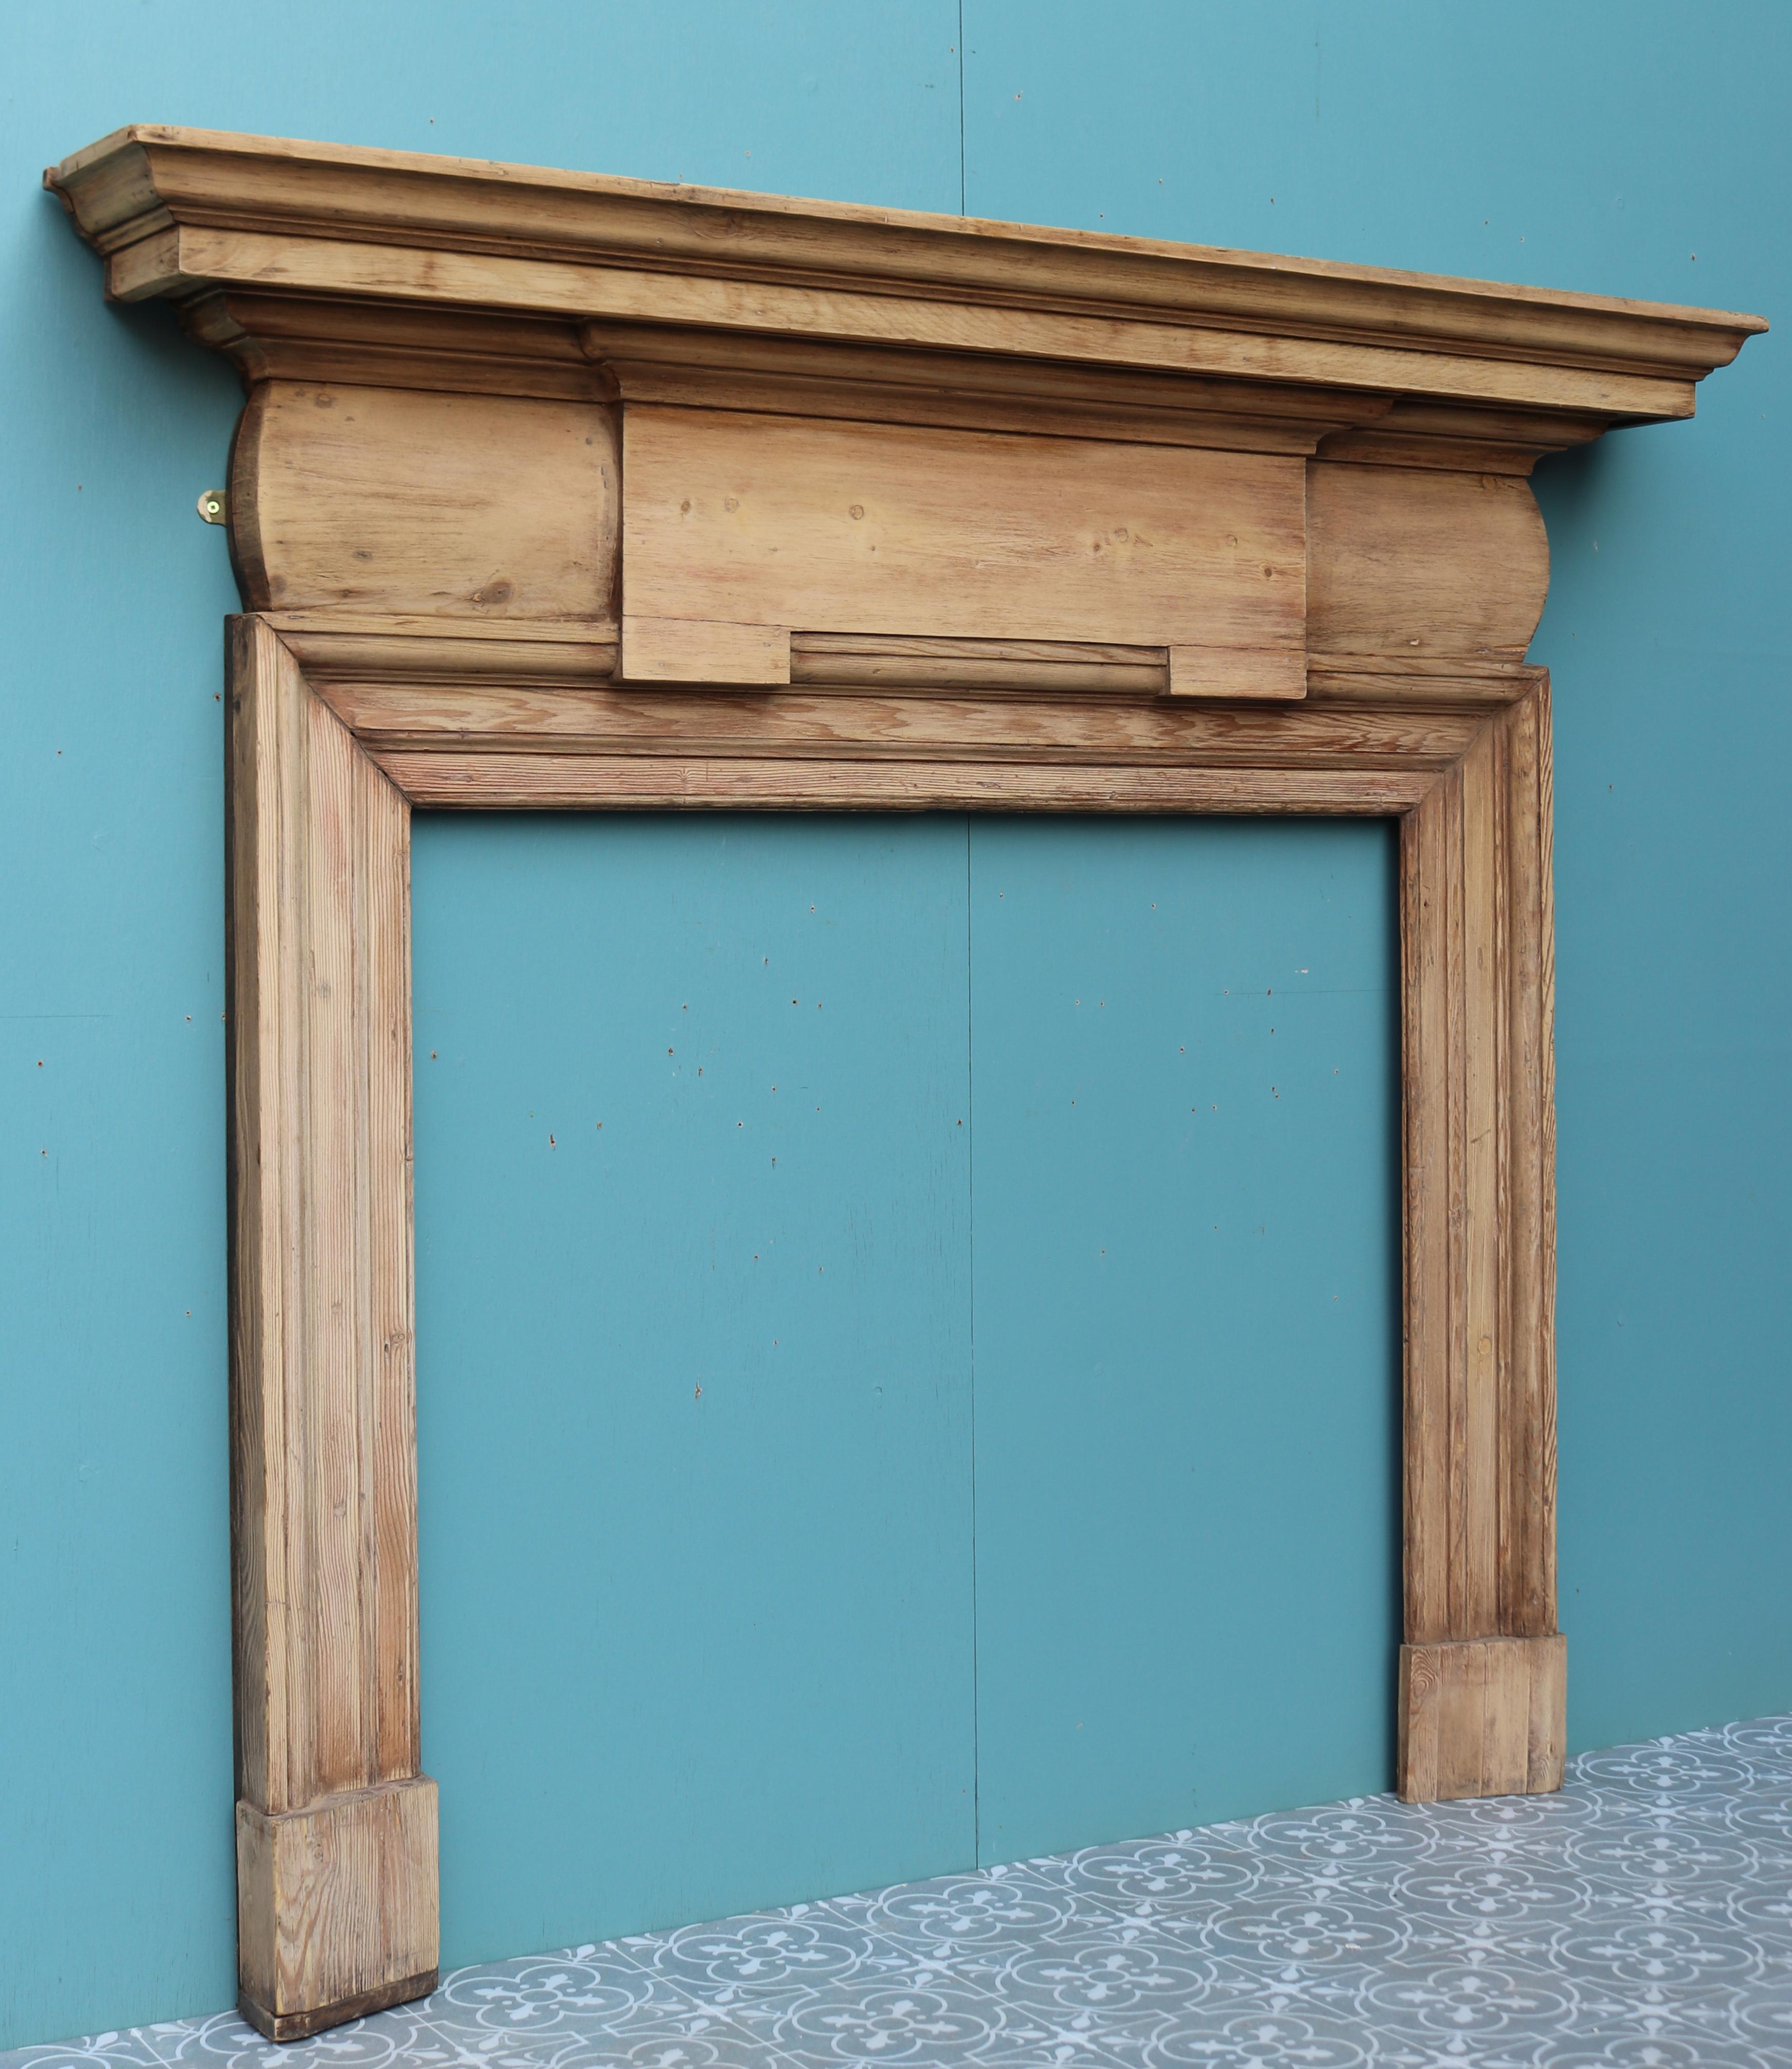 An antique Victorian period fire surround constructed from pine.
 
Additional Dimensions:
 
Opening Height 93 cm
 
Opening Width 99.5 cm
 
Width between outside of foot blocks 129.5 cm